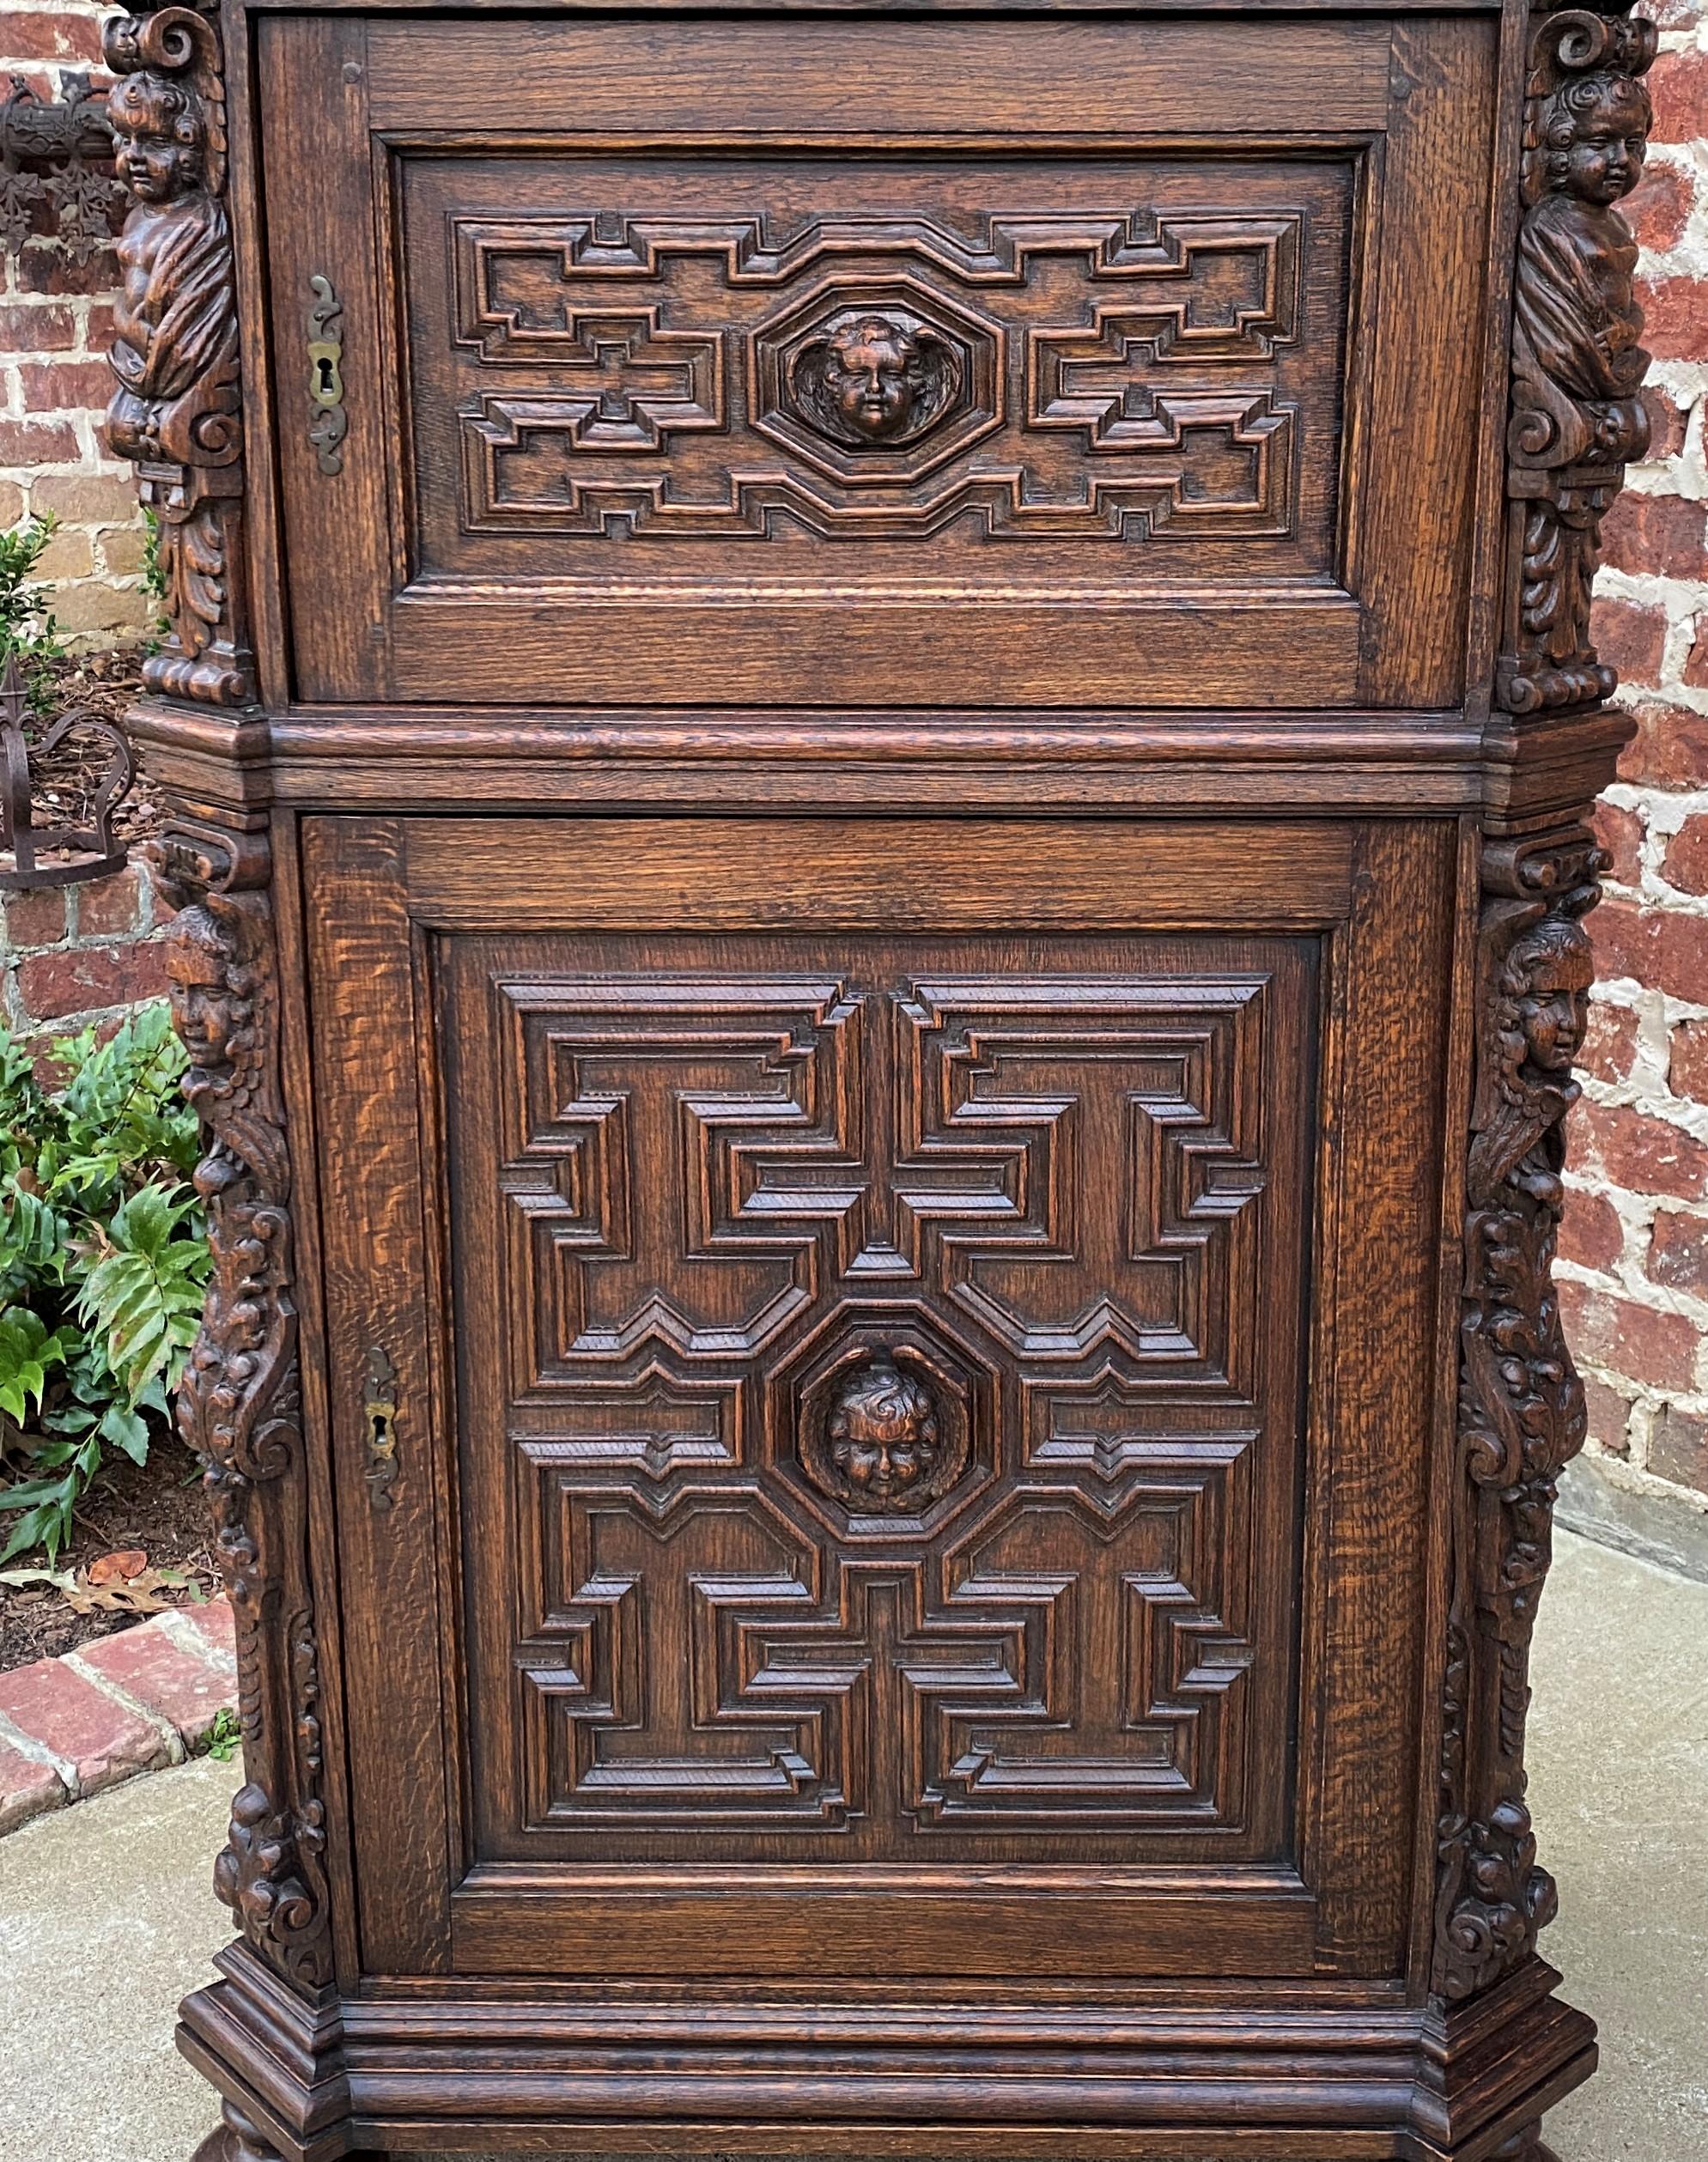 Stunning antique French oak 19th Century Renaissance Revival Lingerie chest or cabinet~~Interior Drawers ~~c. 1880s 

Perfect statement piece that can accommodate any number of storage needs in today's home~~use in a bedroom or dressing area for